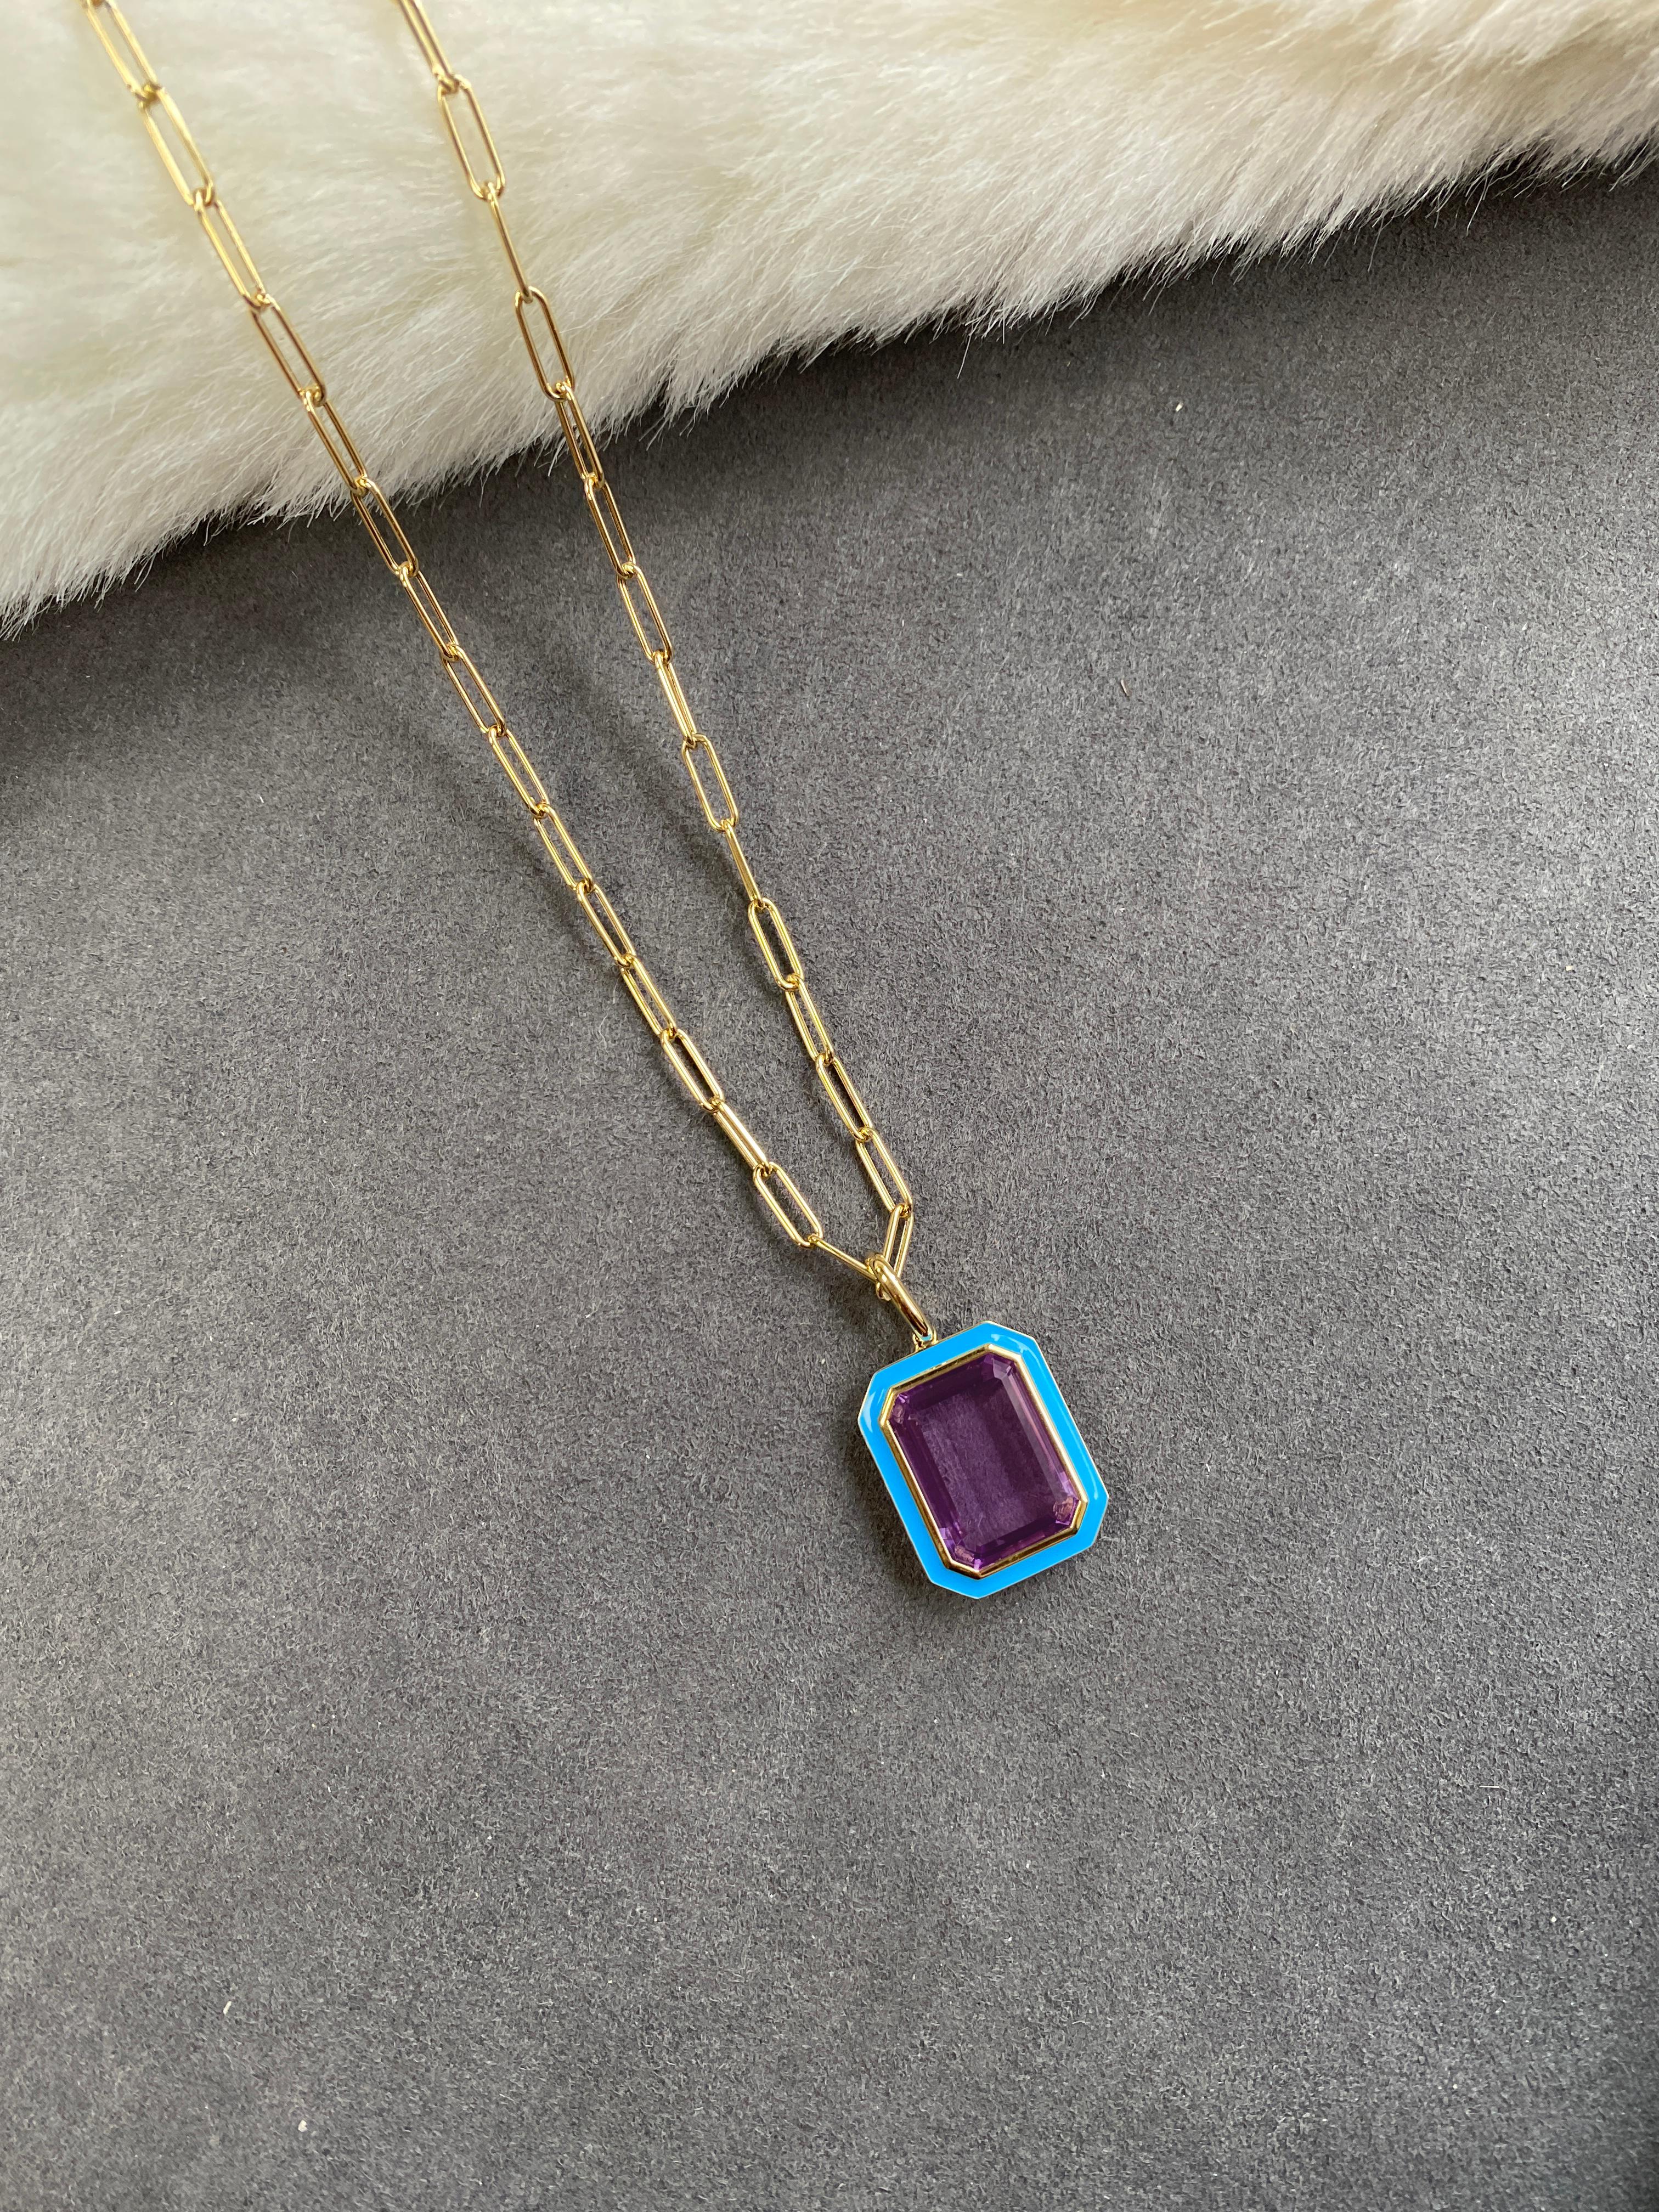 This pendant is a unique combination of Amethyst Emerald Cut in a bezel setting with Turquoise enamel surround. If you want to make a statement this is the perfect pendant to do it!

* Stone size: 16 x 12 mm
* Gemstone: 100% Earth Mined 
* Approx.